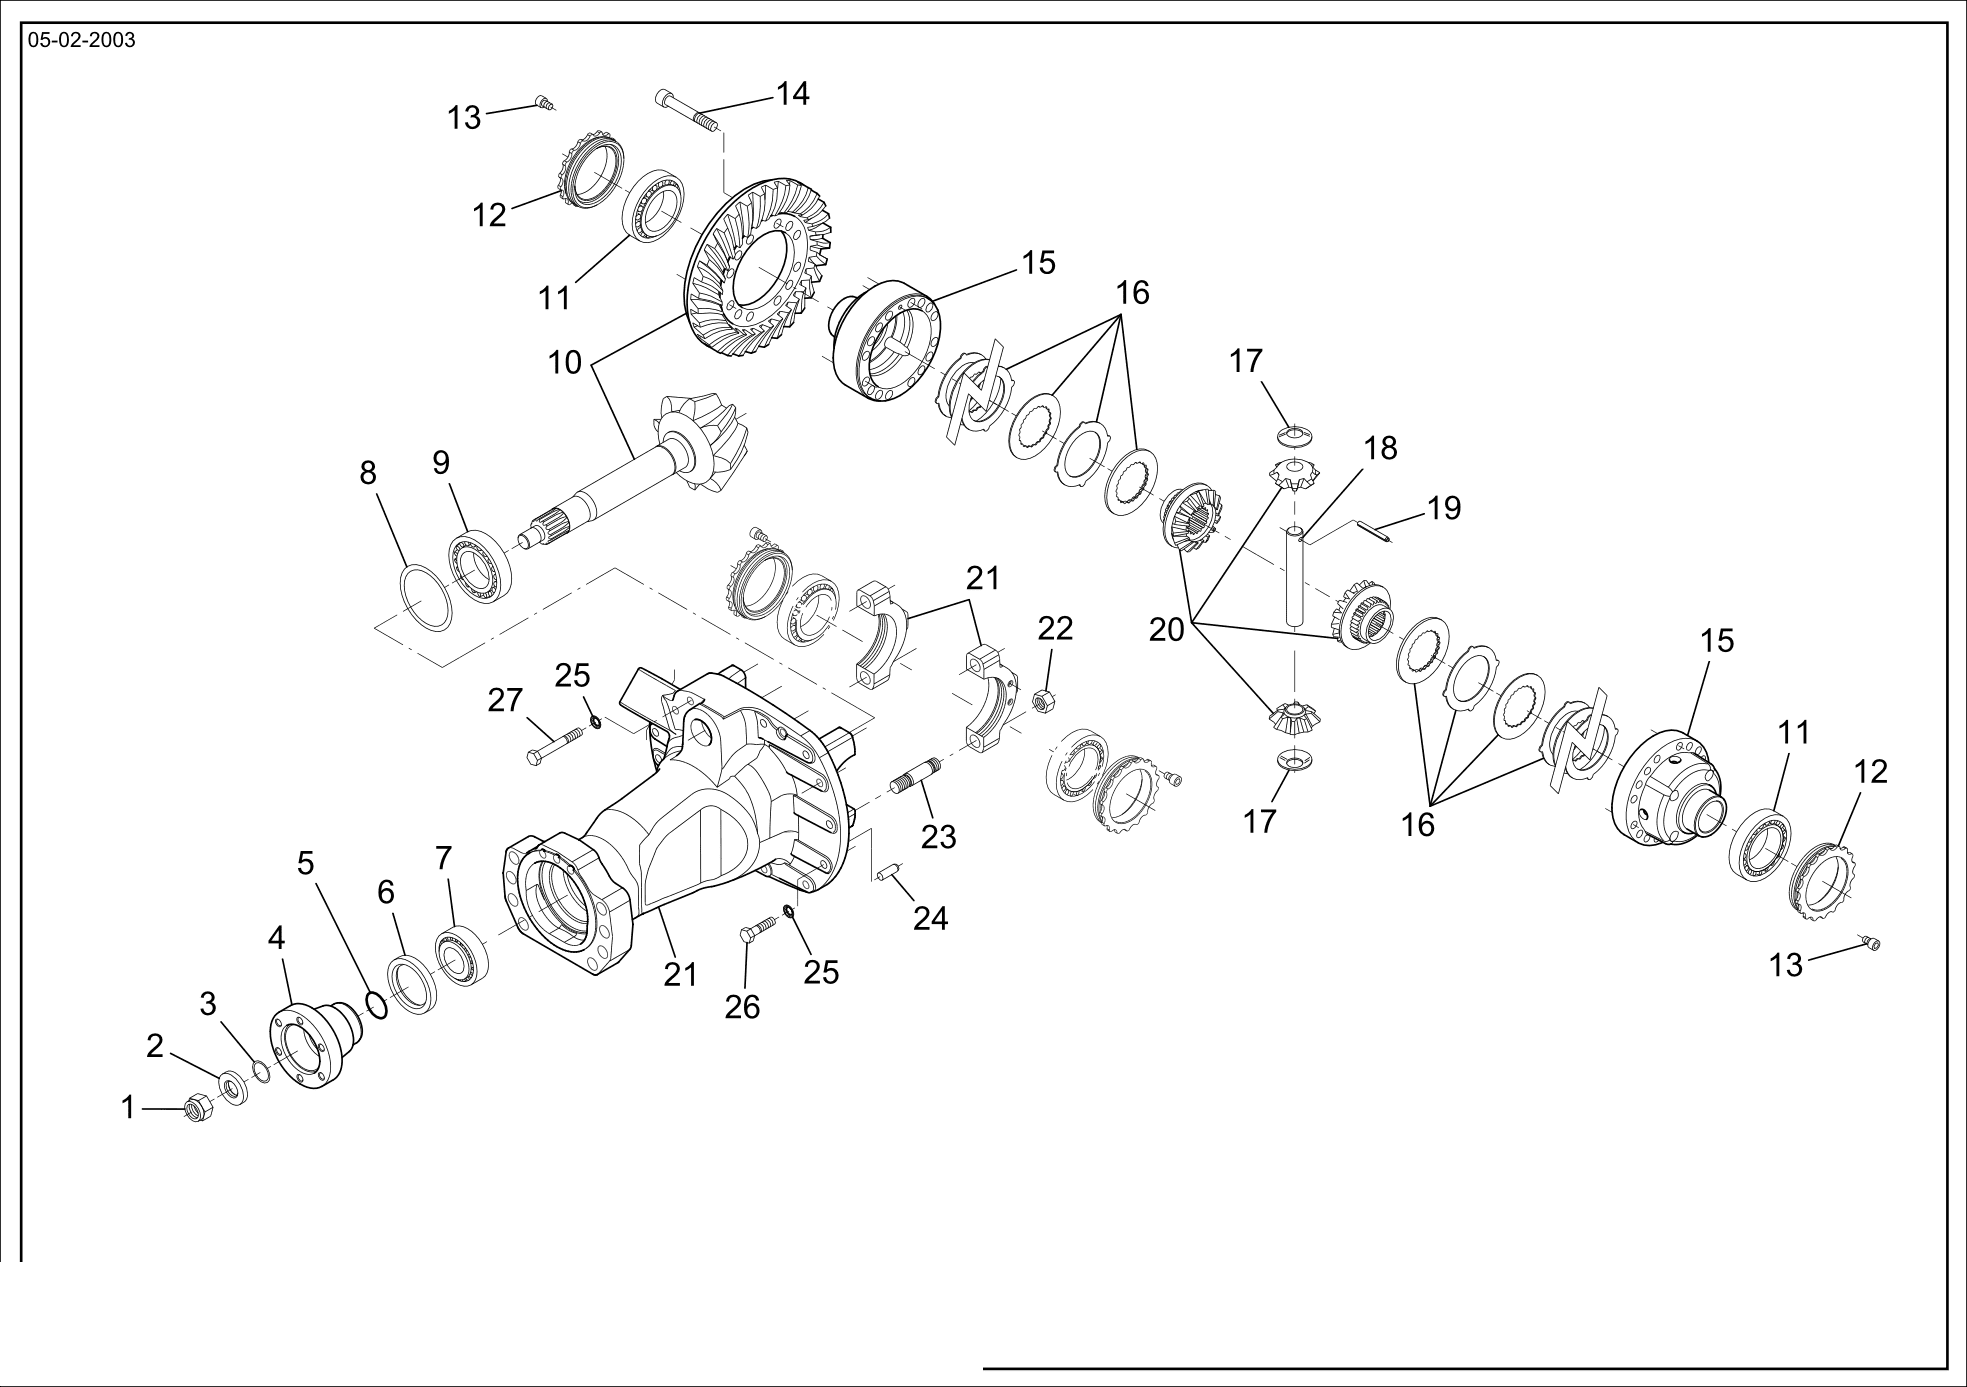 drawing for AGCO X500625900000 - ROLL PIN (figure 1)